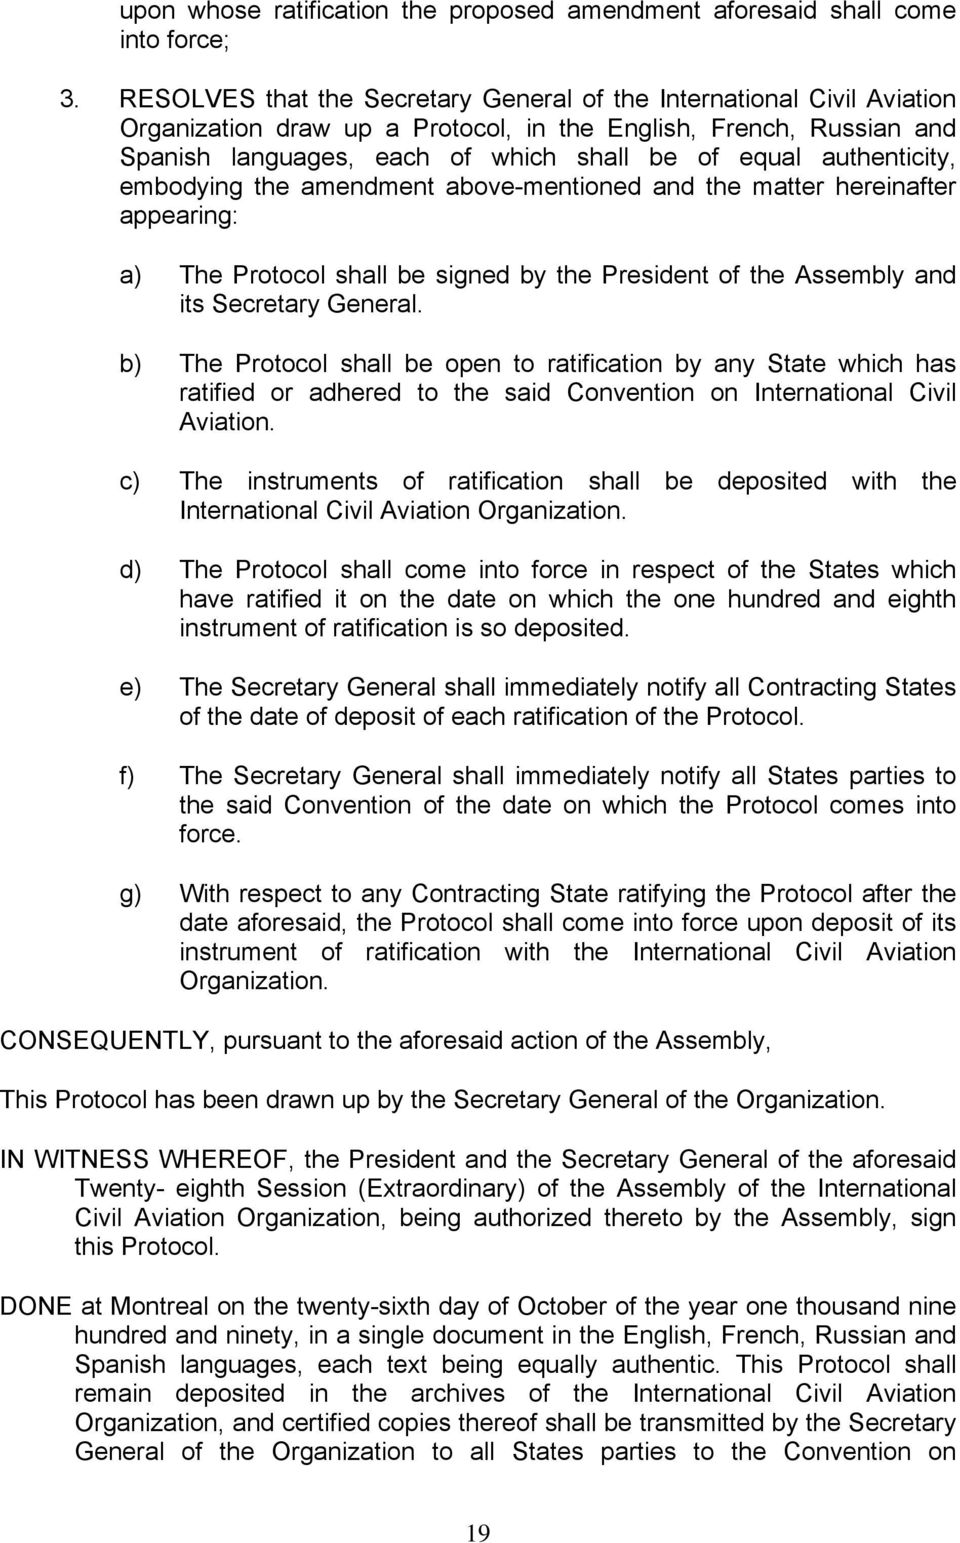 authenticity, embodying the amendment above-mentioned and the matter hereinafter appearing: a) The Protocol shall be signed by the President of the Assembly and its Secretary General.